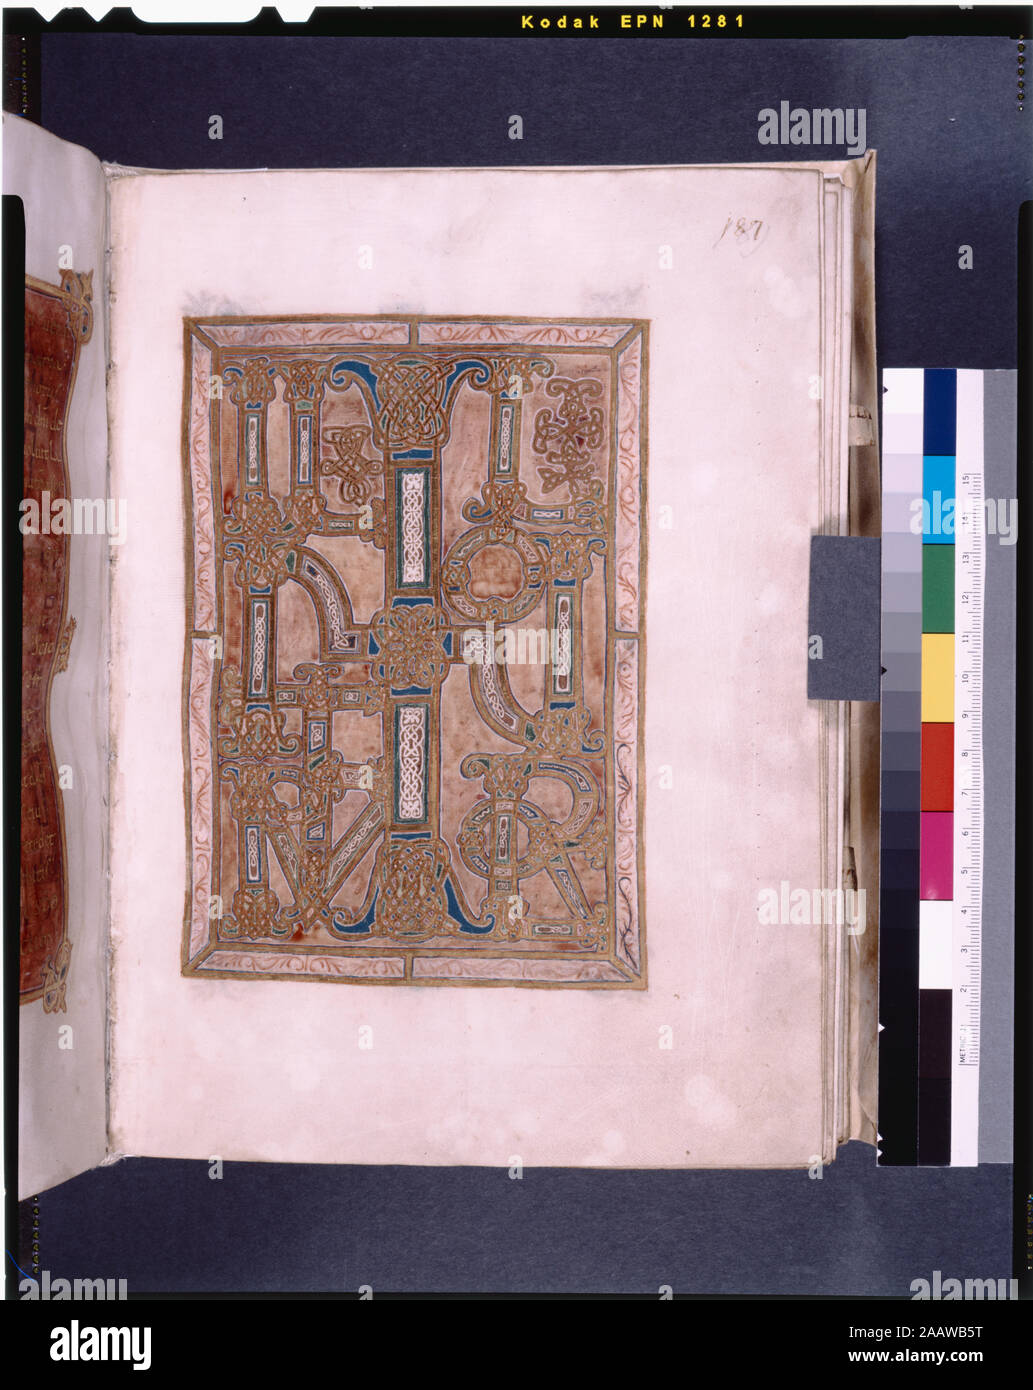 Elaborate Initials In Gold Green Blue And Purple On Purple Background In Gold And Purple Frame Listed In De Ricci Seymour Census Of Medieval And Renaissance Manuscripts In The United States And